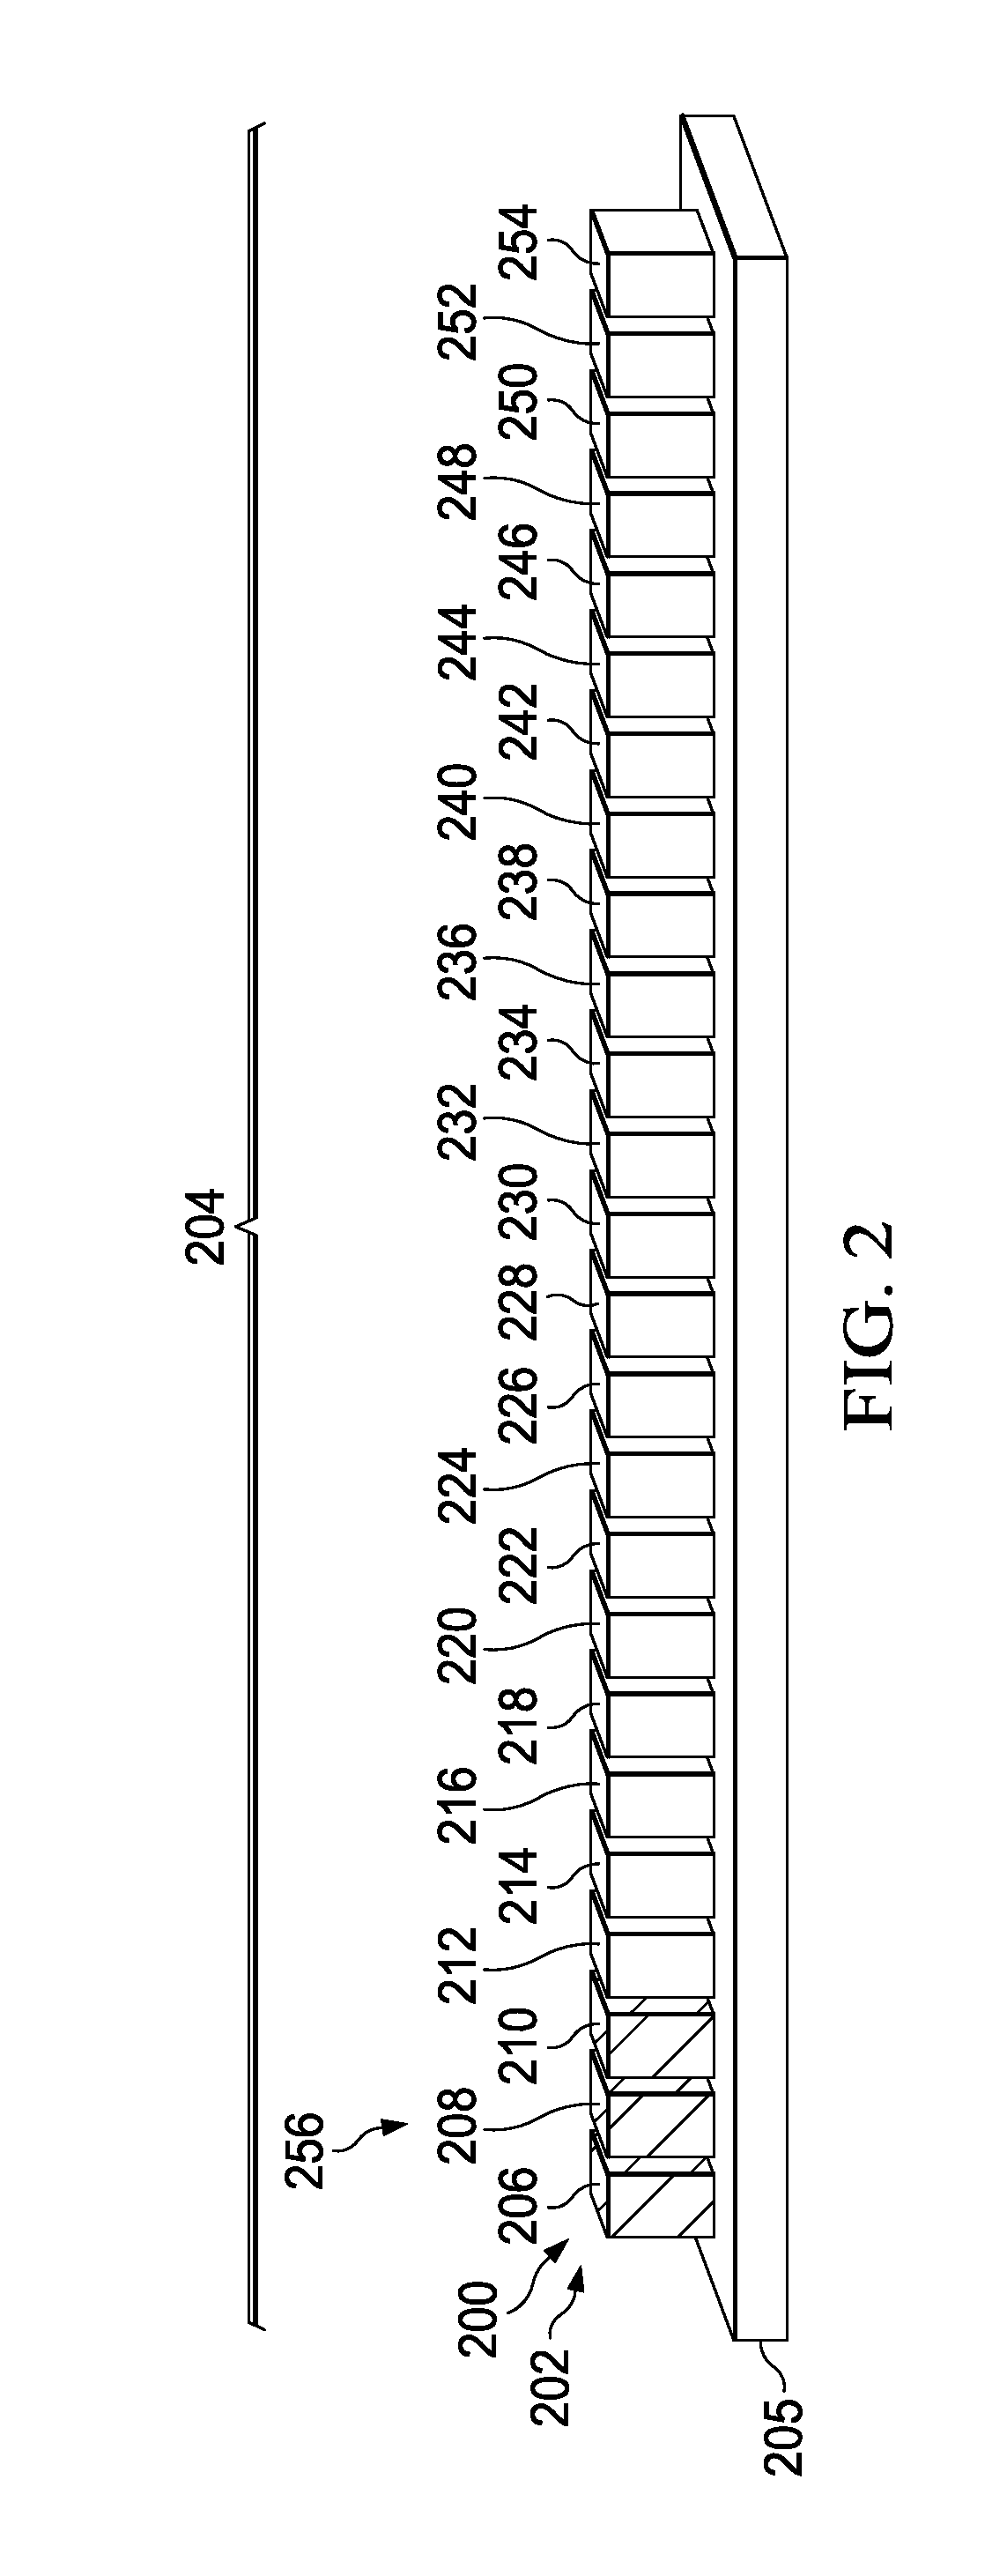 Method and apparatus for modifying a reconfiguration algorithm for an antenna system